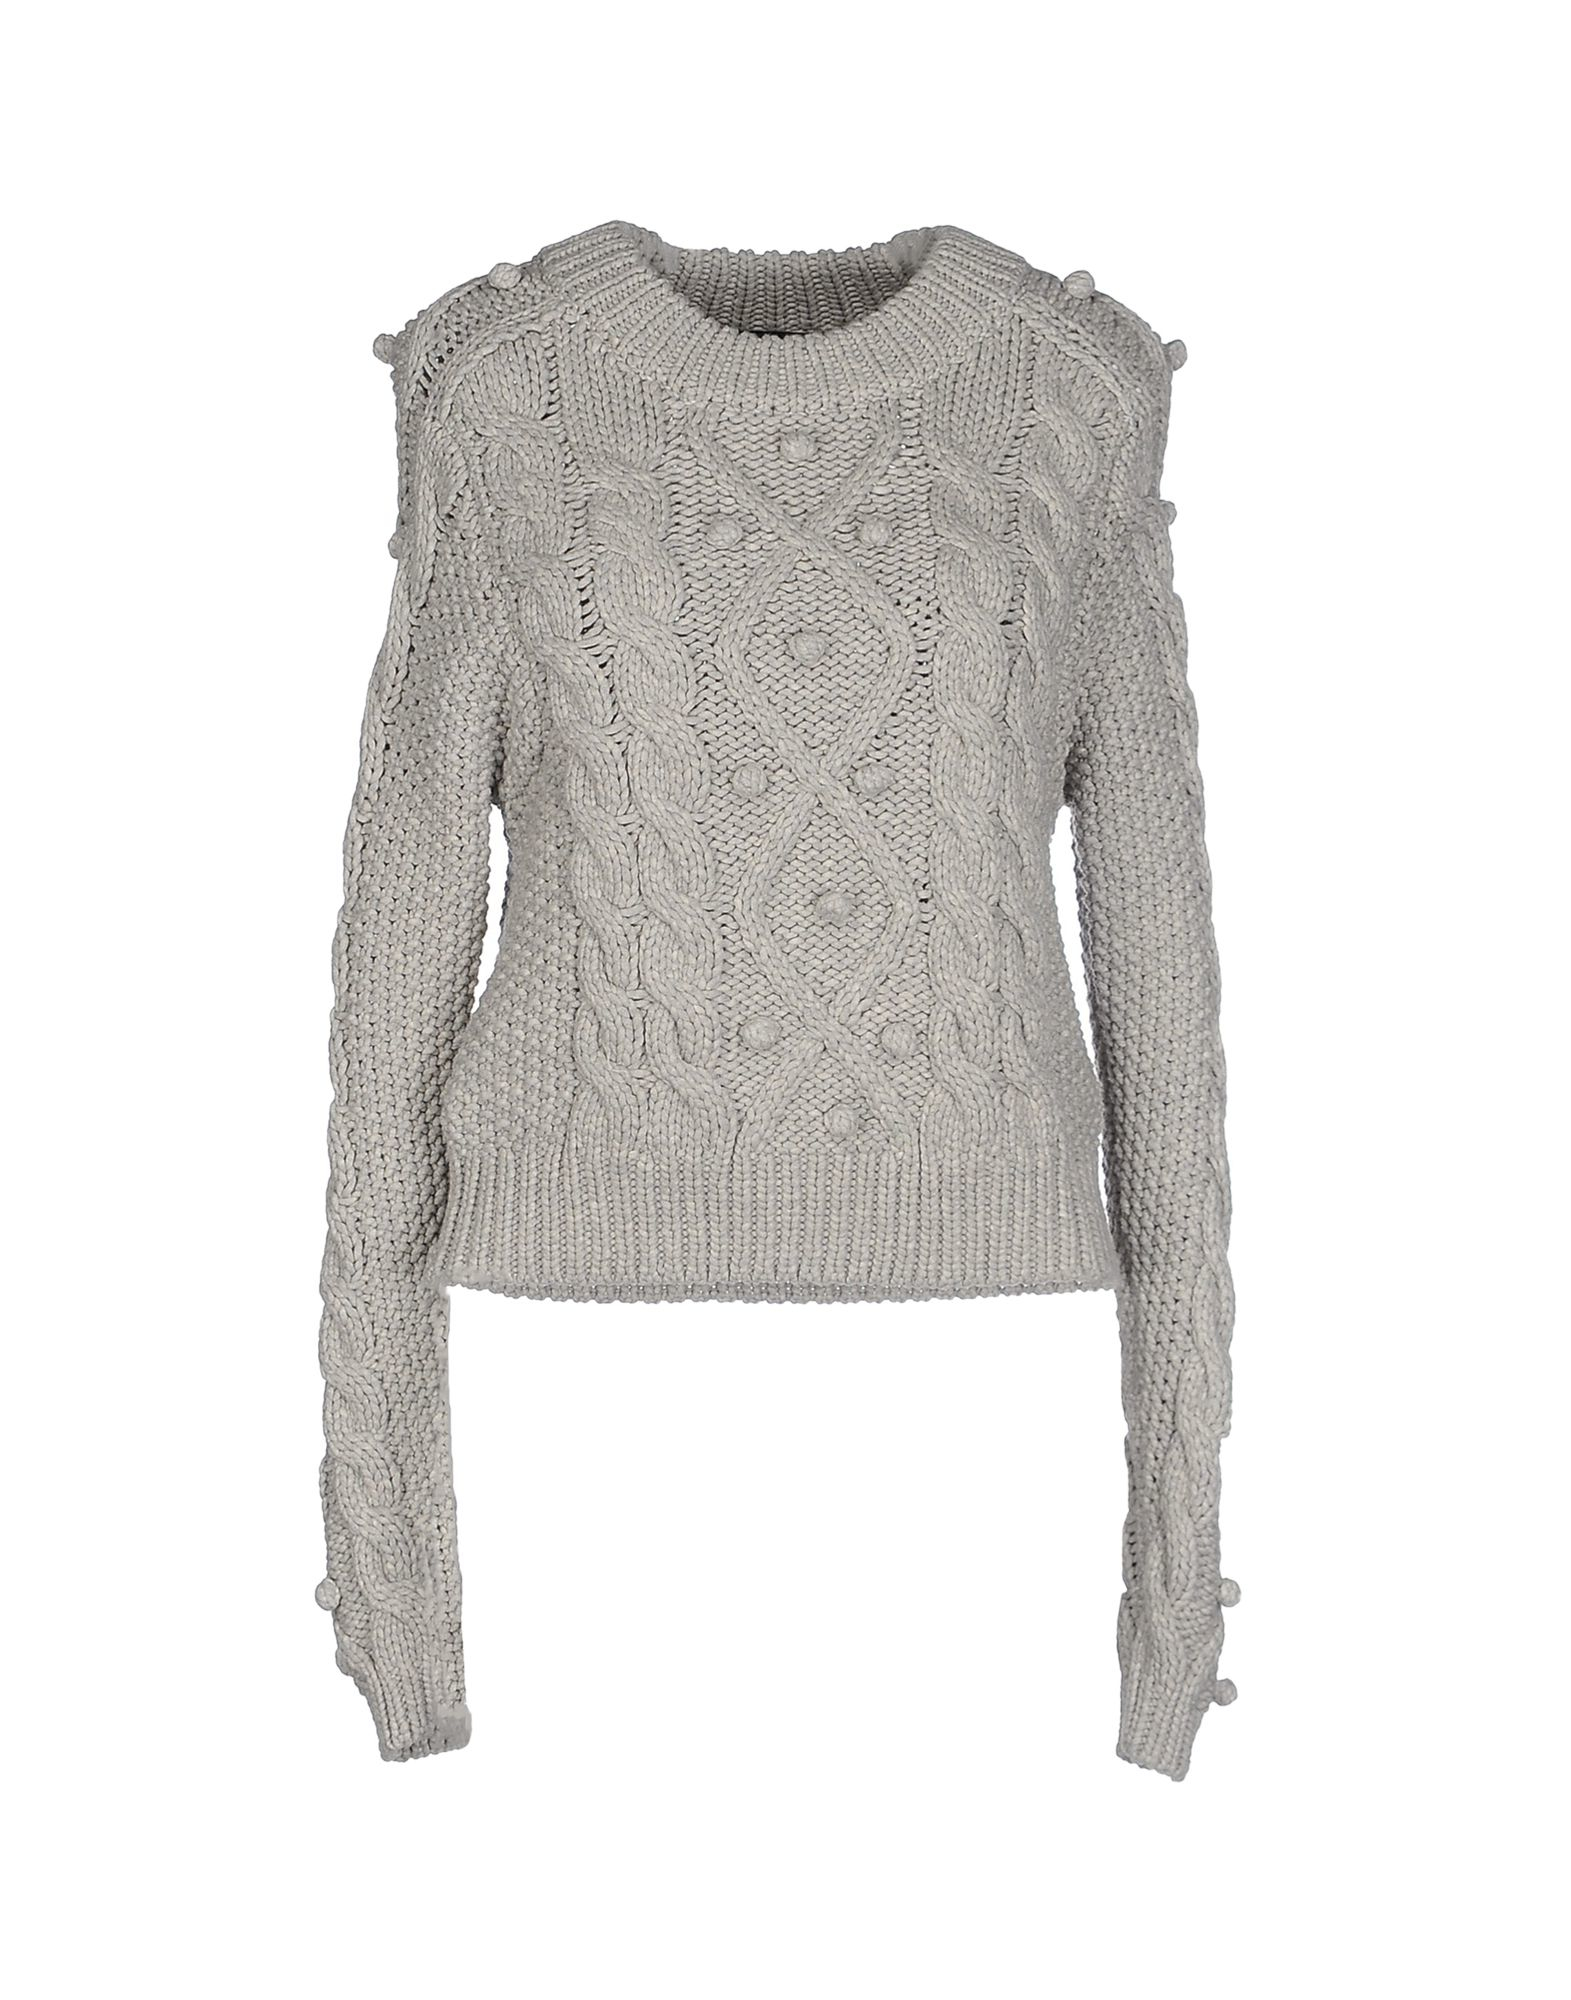 Marc by marc jacobs Jumper in Gray (Light grey) - Save 56% | Lyst